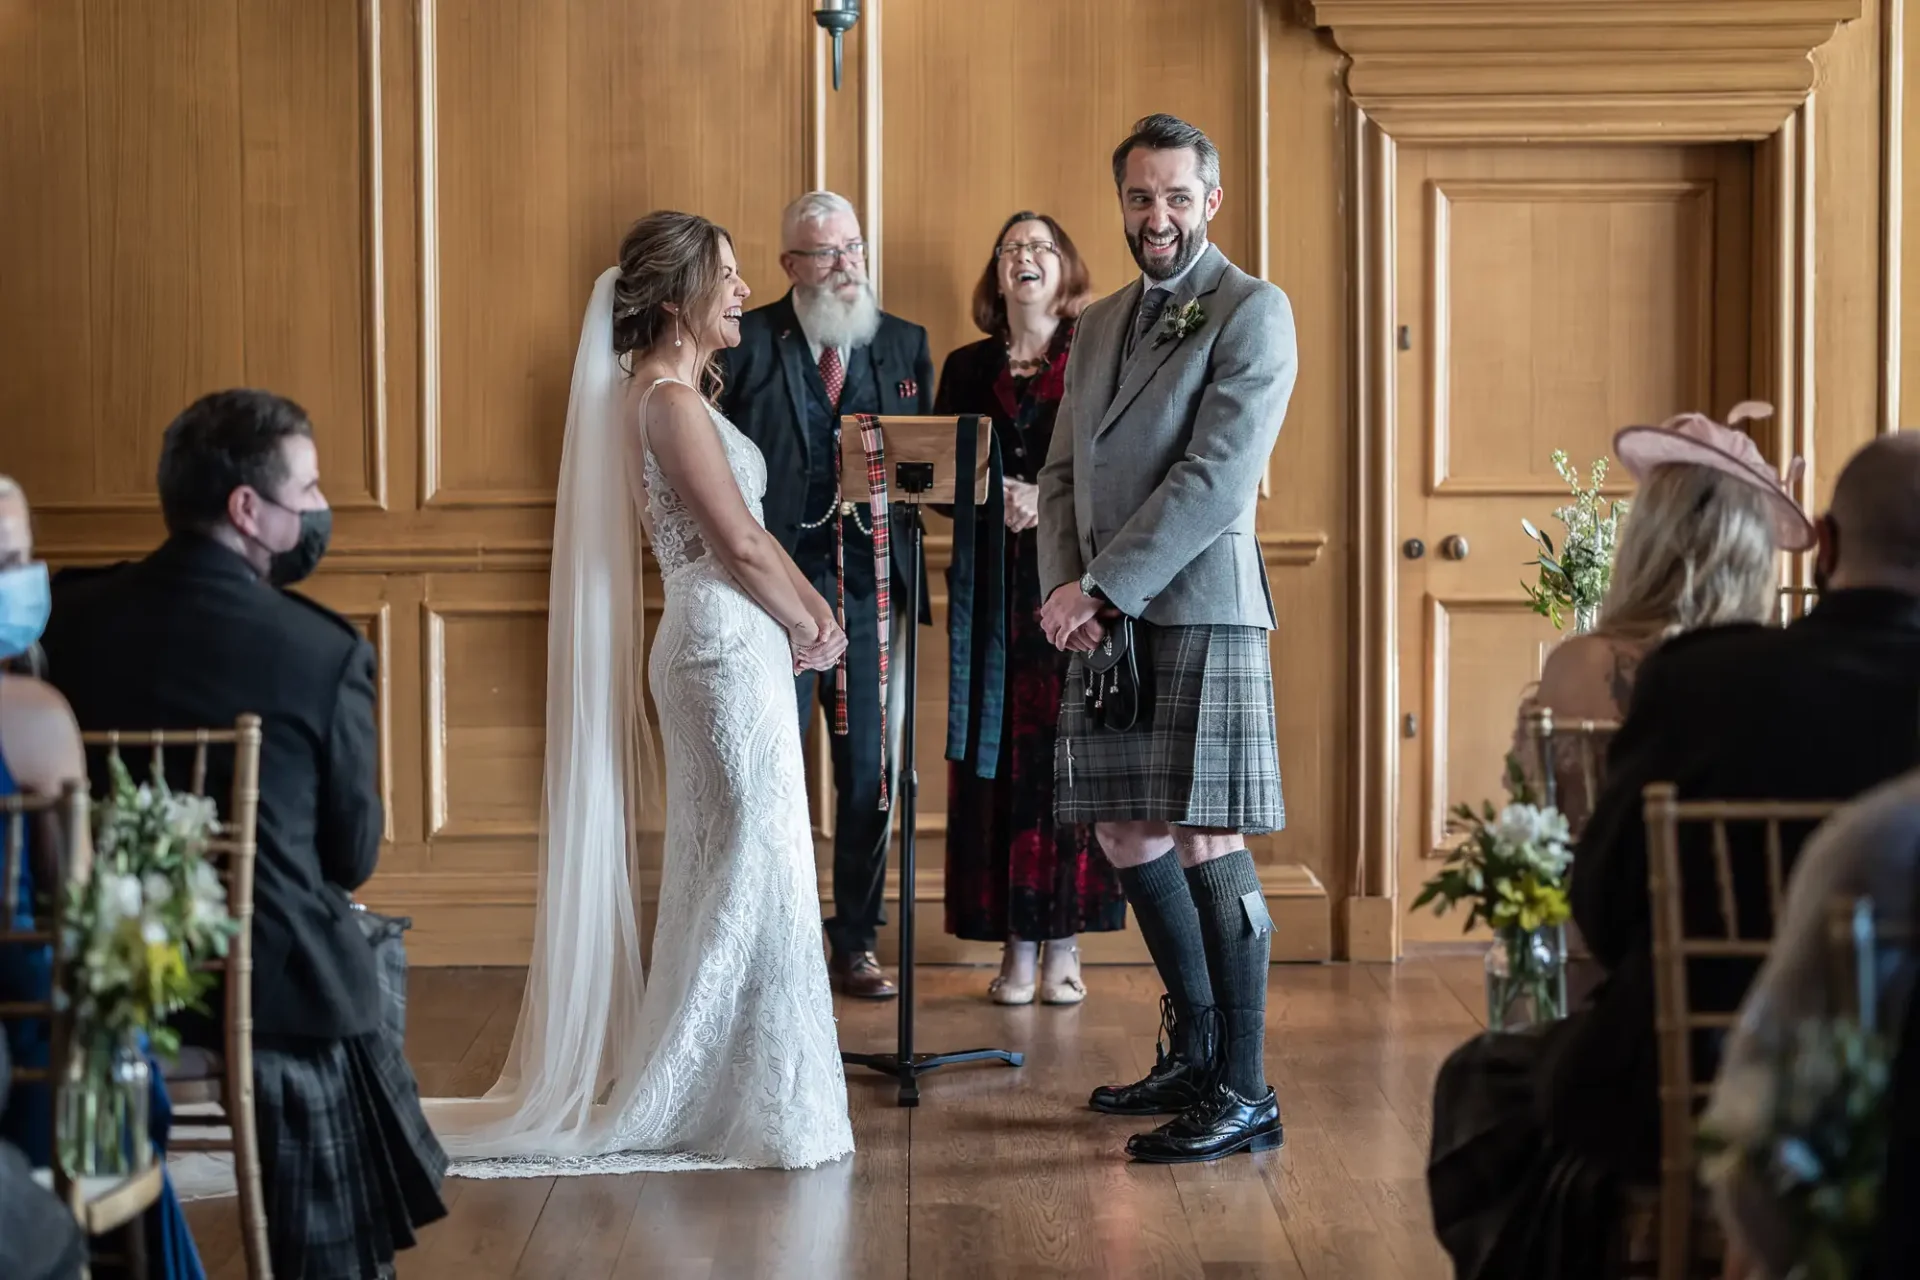 A bride and groom exchanging vows at a wedding ceremony, attended by guests and an officiant in a wood-paneled room. the groom wears a kilt.